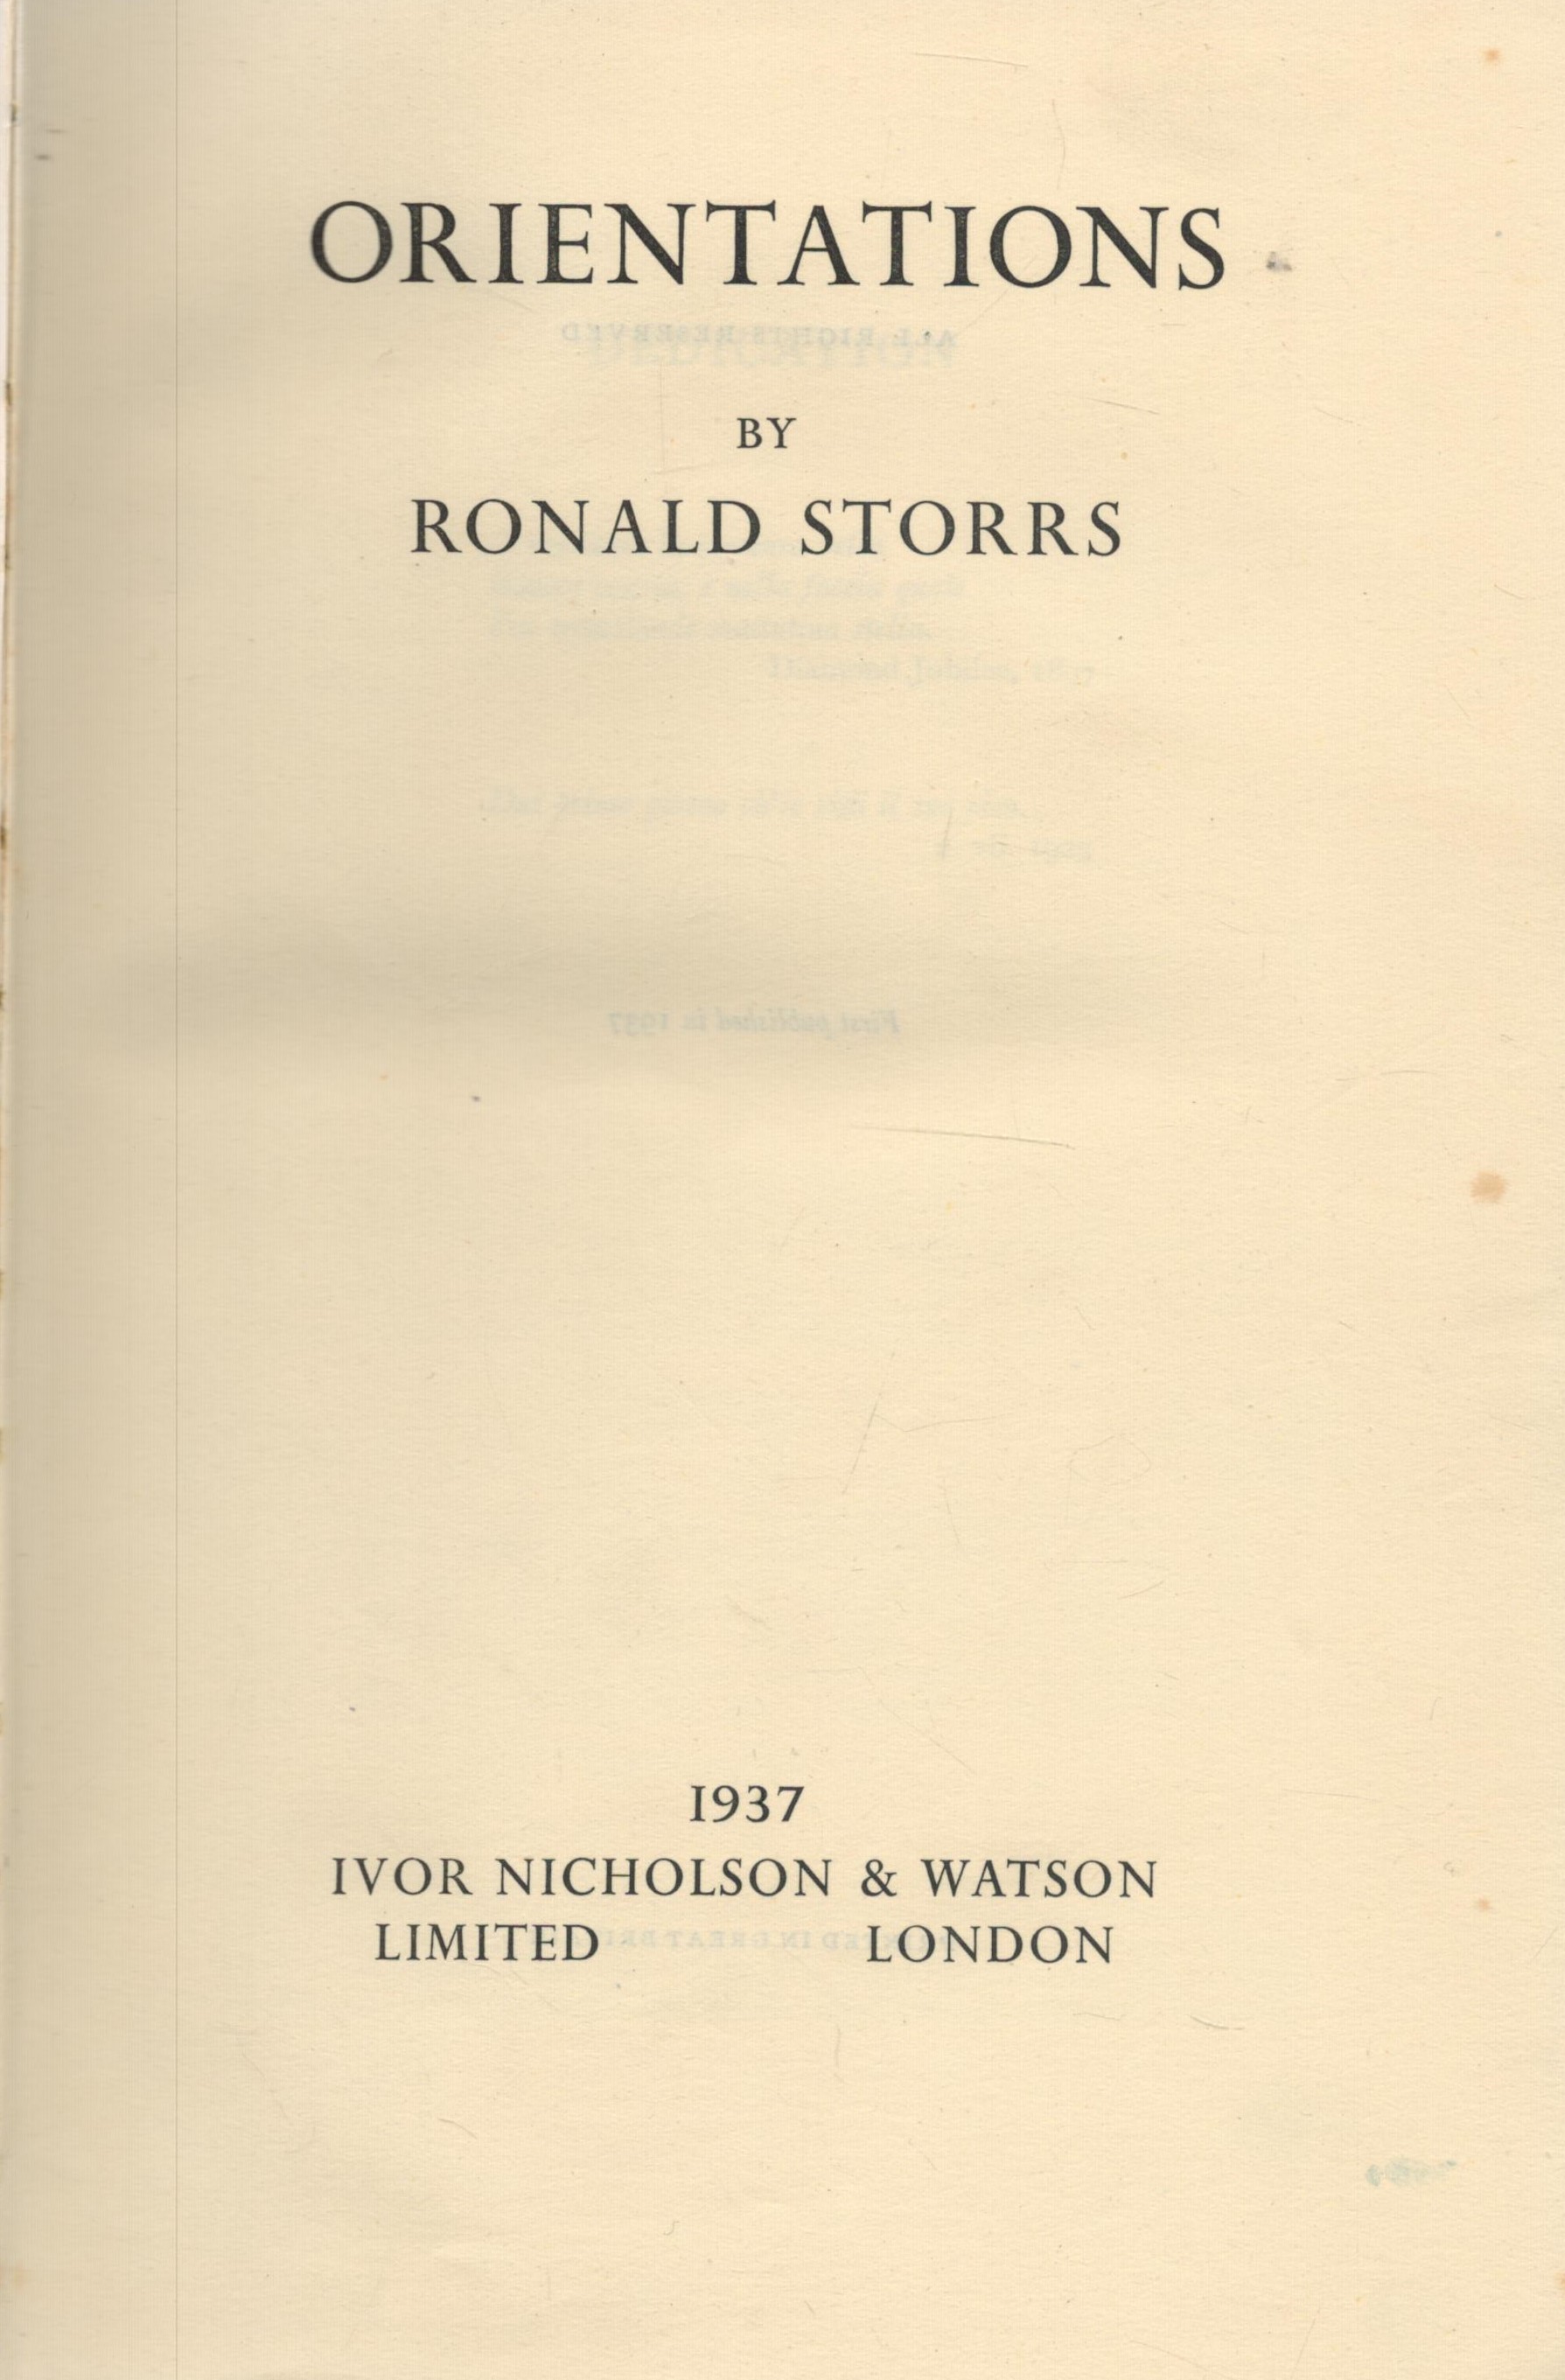 Ronald Storrs Orientations. Published by Ivor Nicholson and Watson Ltd. London. 1937. 624 pages - Image 2 of 3